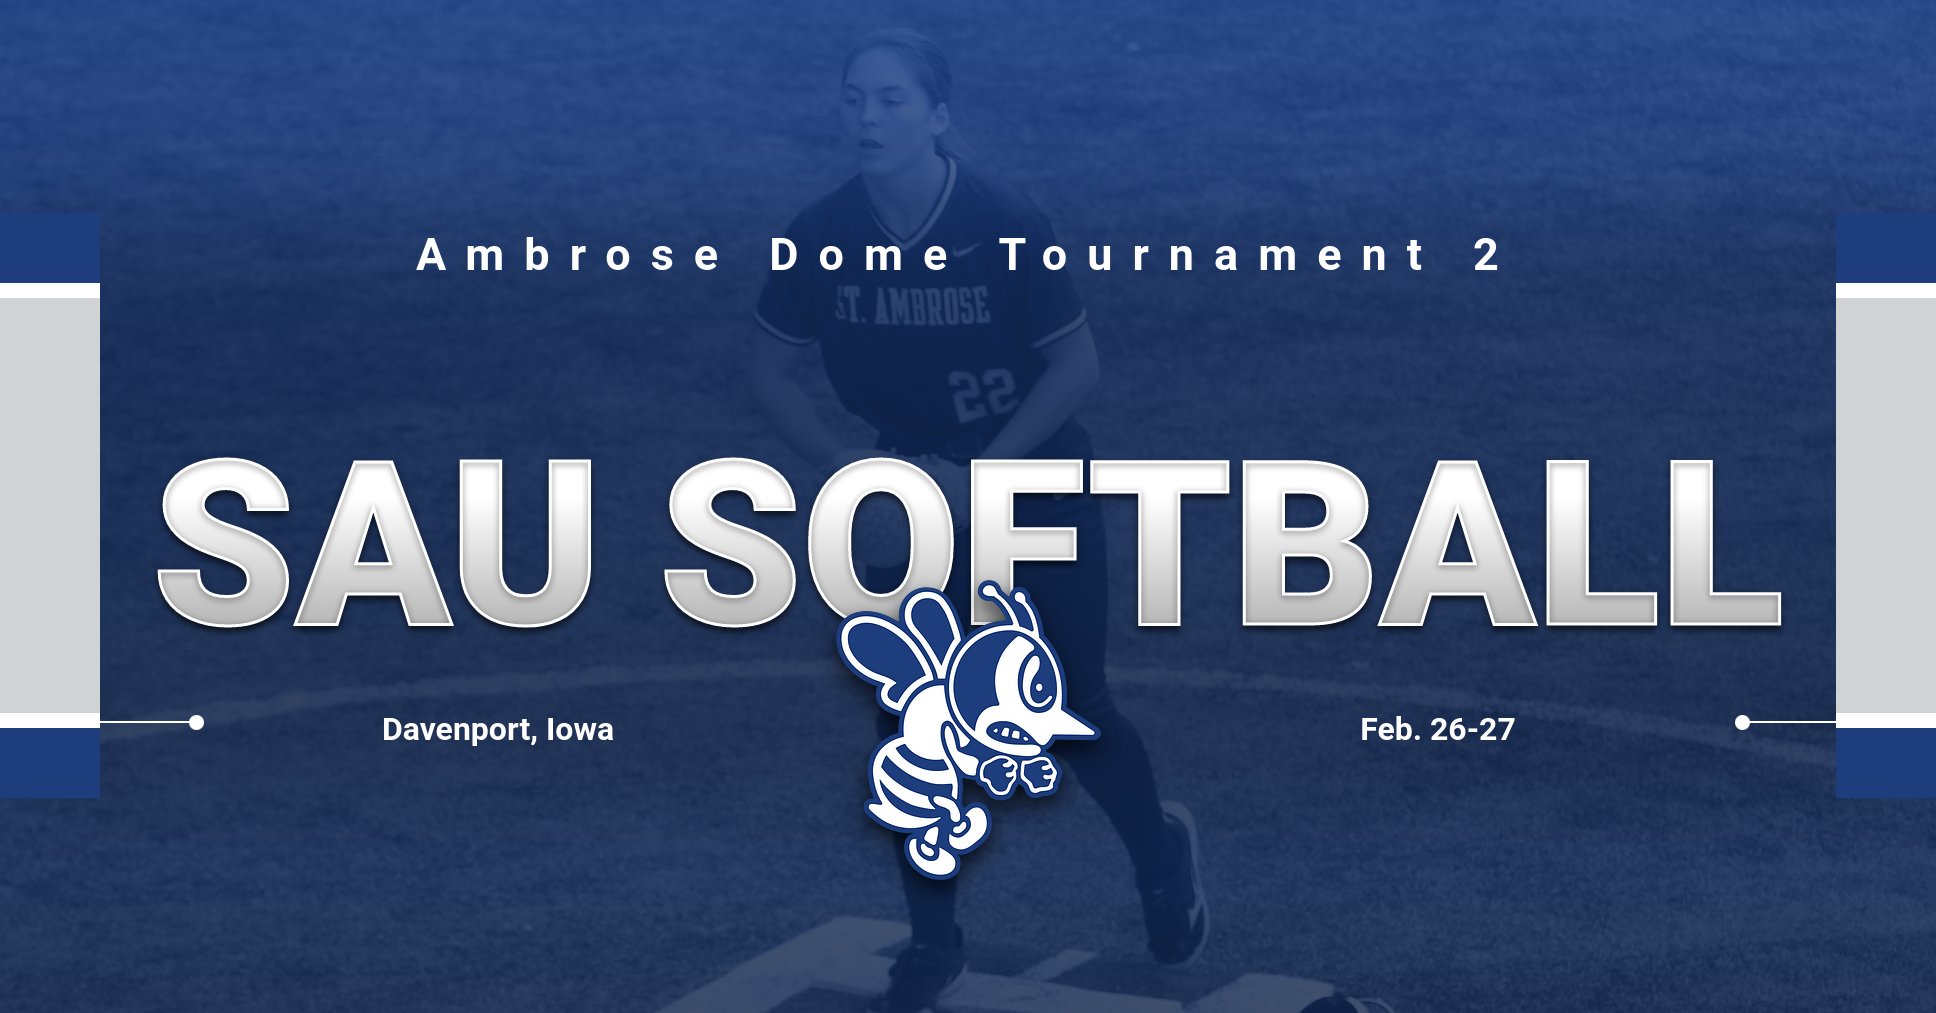 SAU gets two more wins at second Dome Tournament